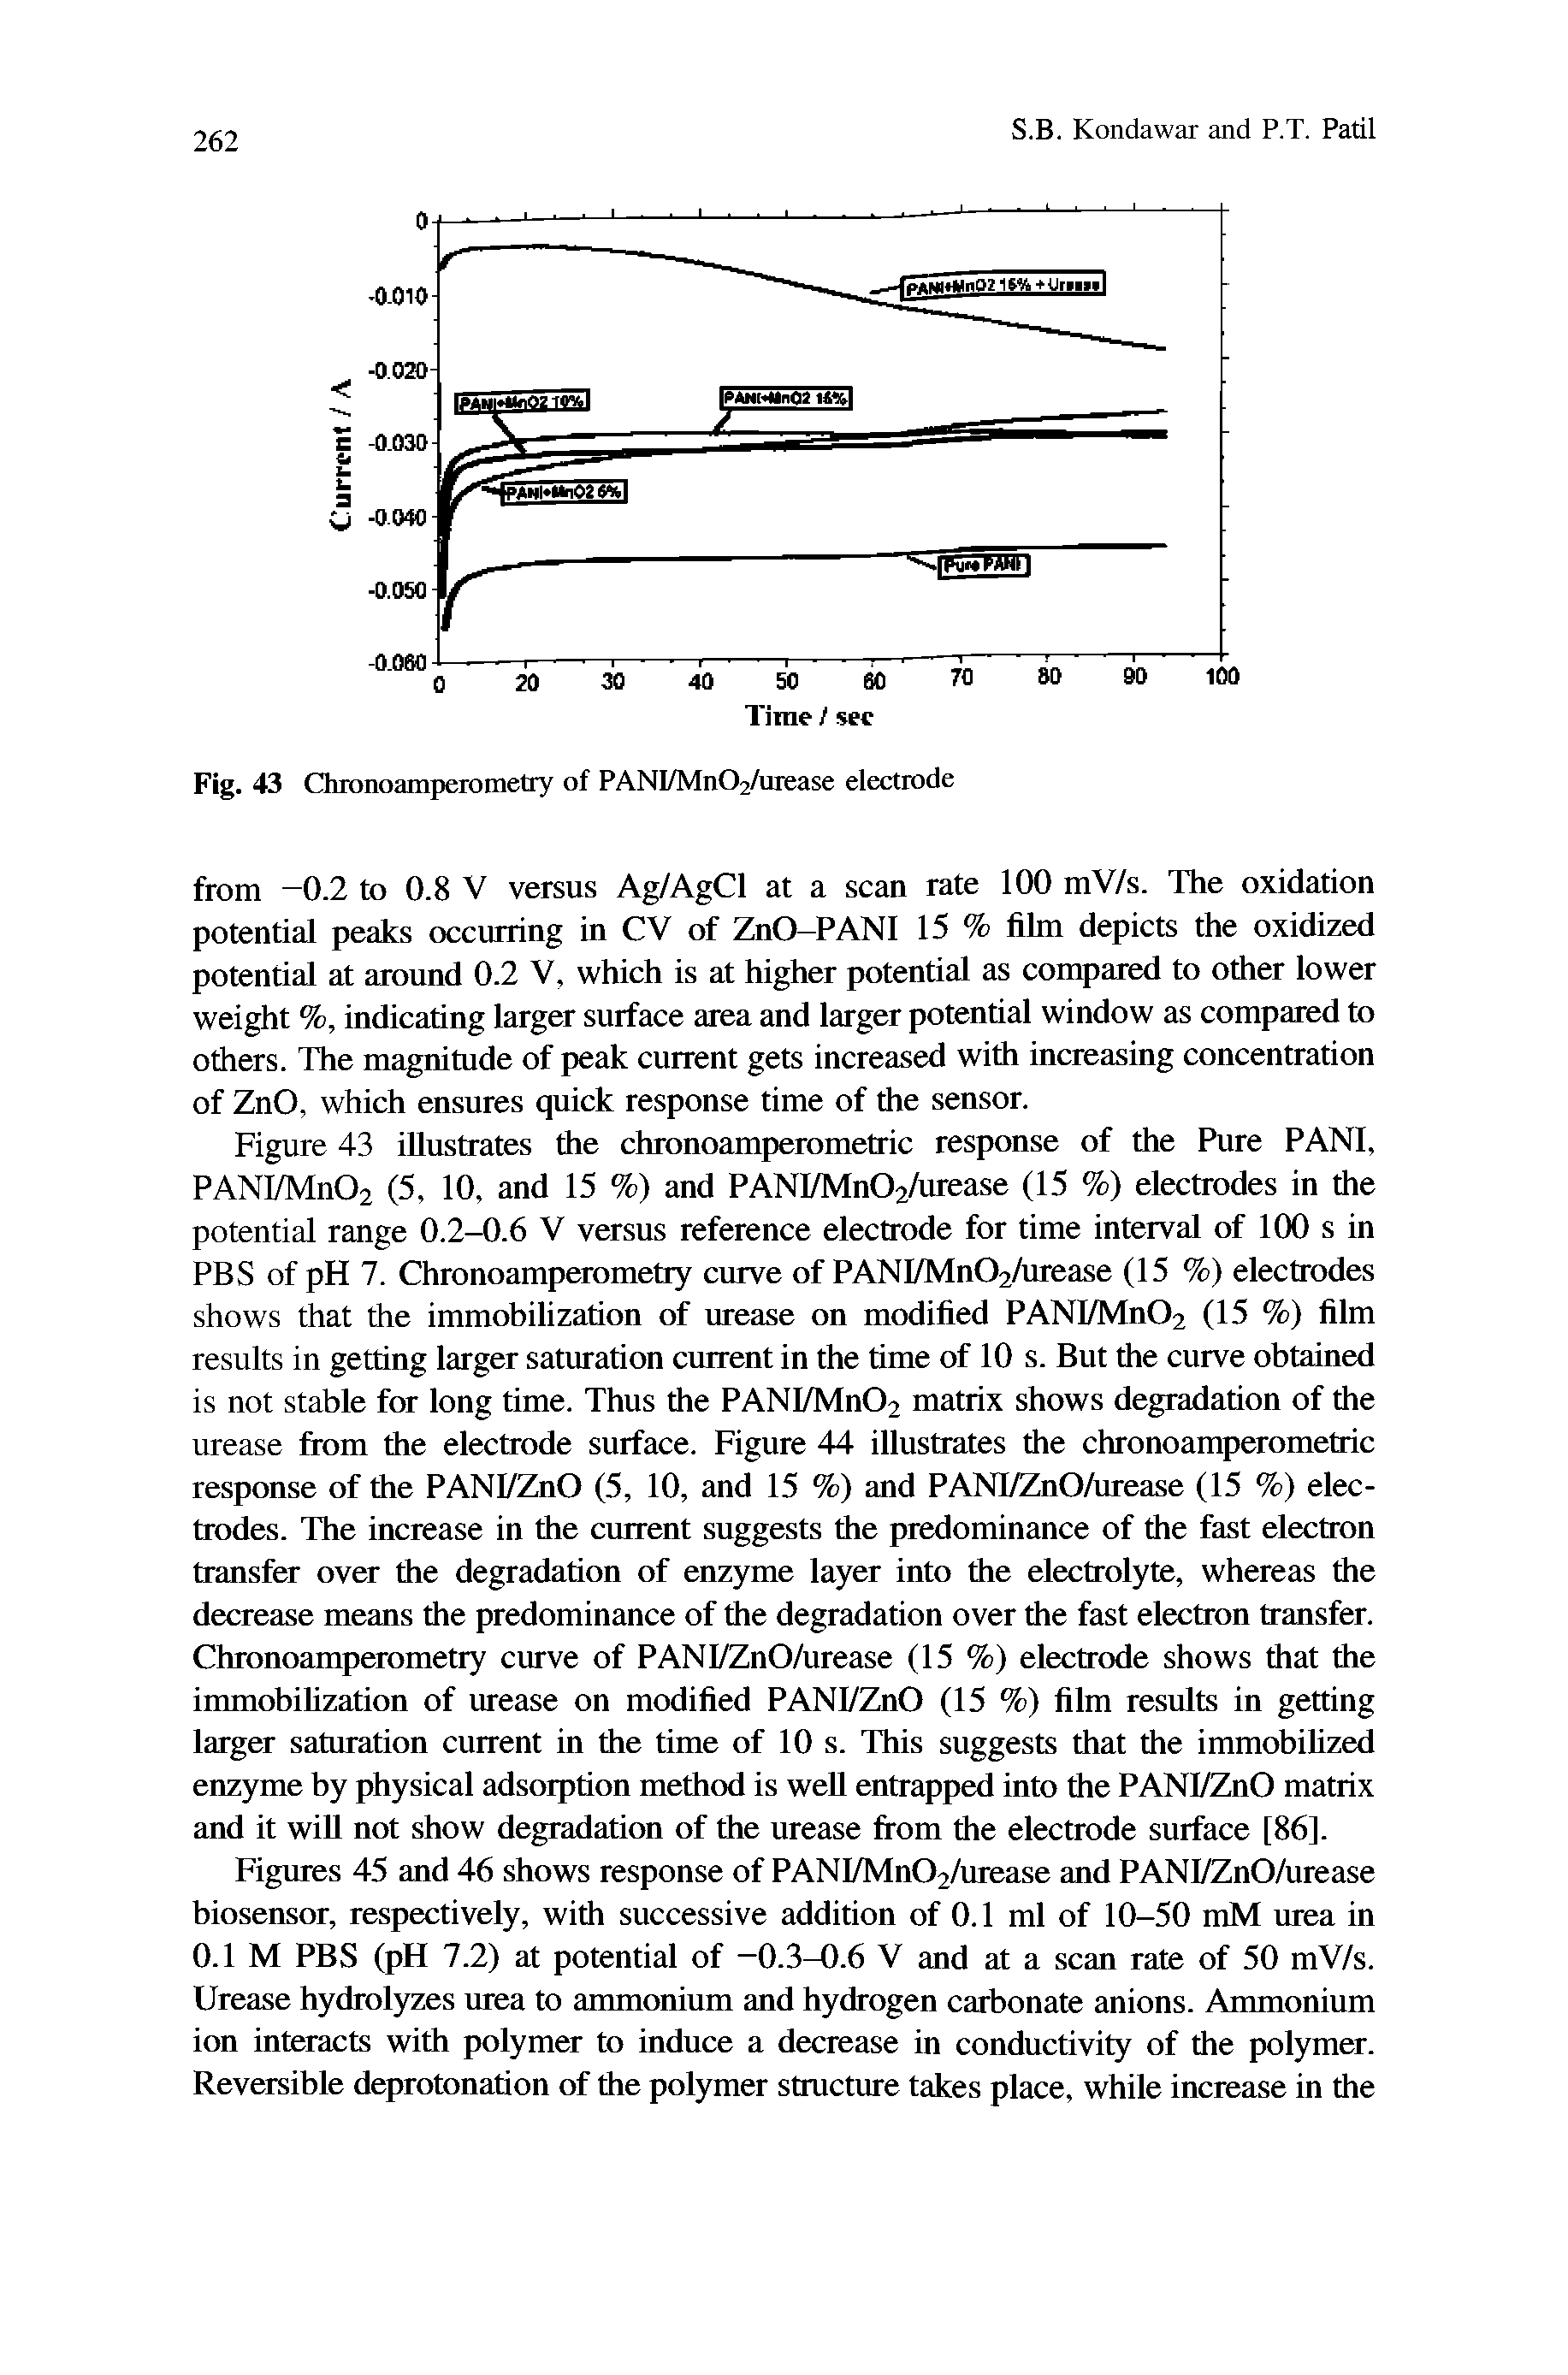 Figures 45 and 46 shows response of PANI/Mn02/urease and PANFZnO/urease biosensor, respectively, with successive addition of 0.1 ml of 10-50 mM urea in 0.1 M PBS (pH 7.2) at potential of —0.3-0.6 V and at a scan rate of 50 mV/s. Urease hydrolyzes urea to ammonium and hydrogen carbonate anions. Ammonium ion interacts with polymer to induce a decrease in conductivity of the polymer. Reversible deprotonation of the polymer structure takes place, while increase in the...